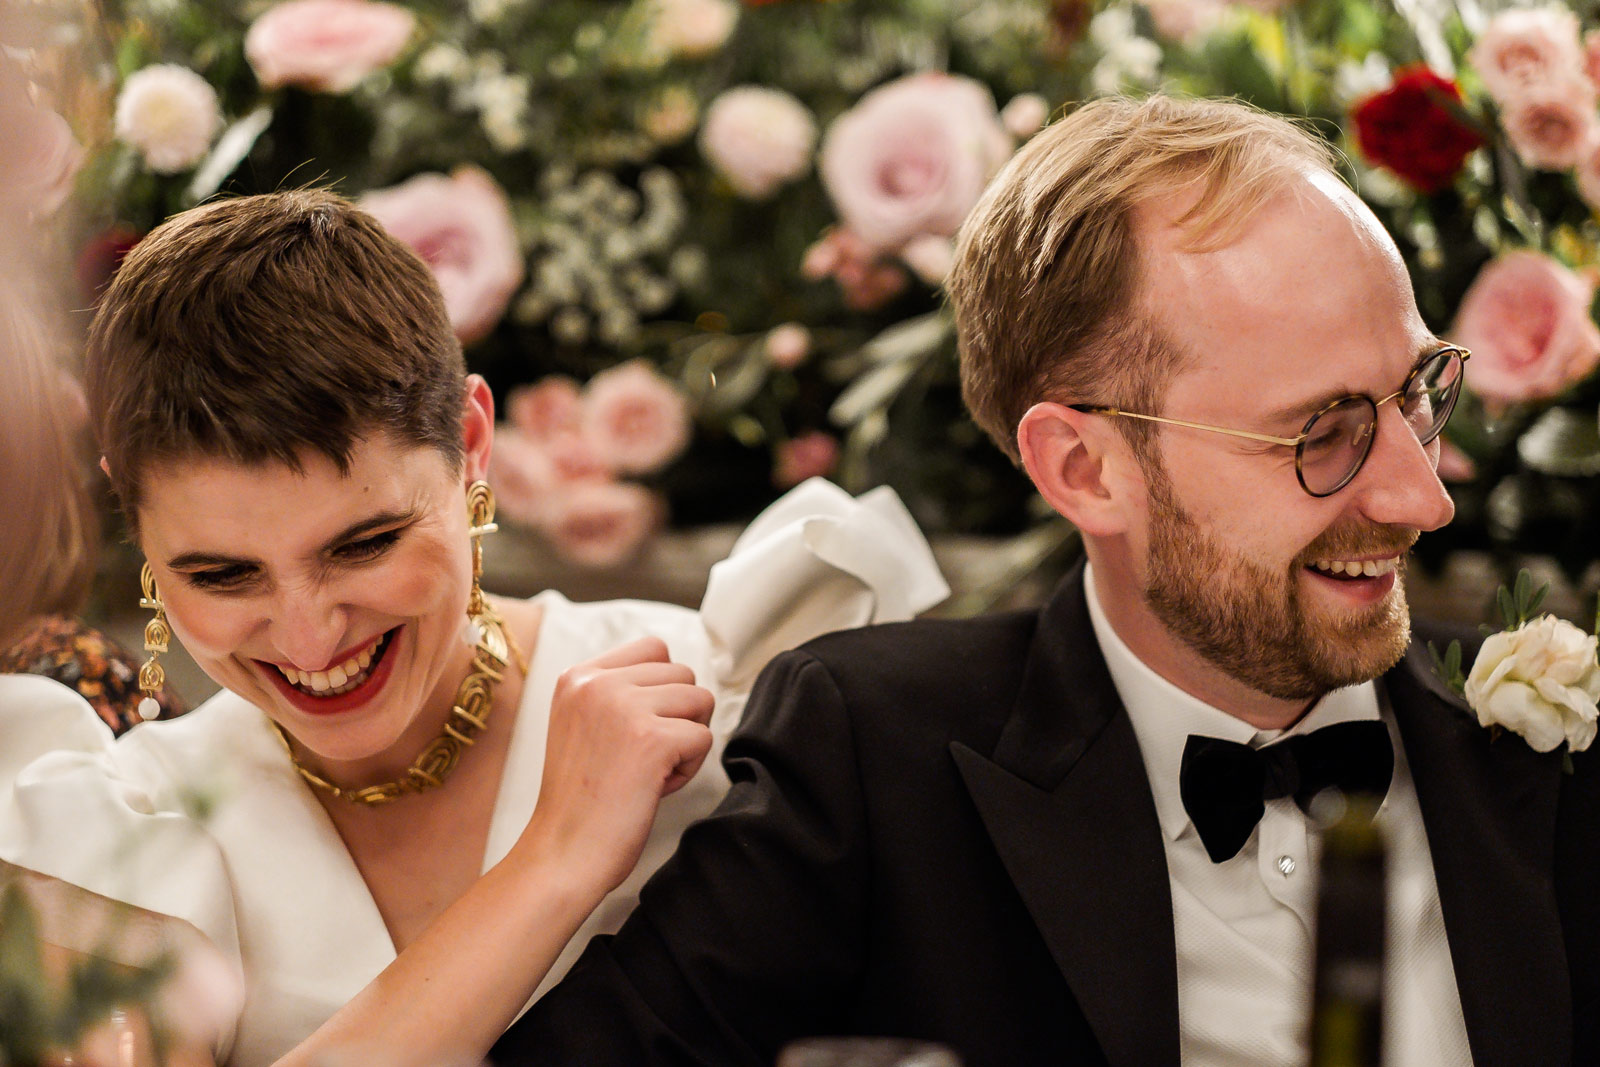 Natural and authentic London wedding photography by Emis Weddings